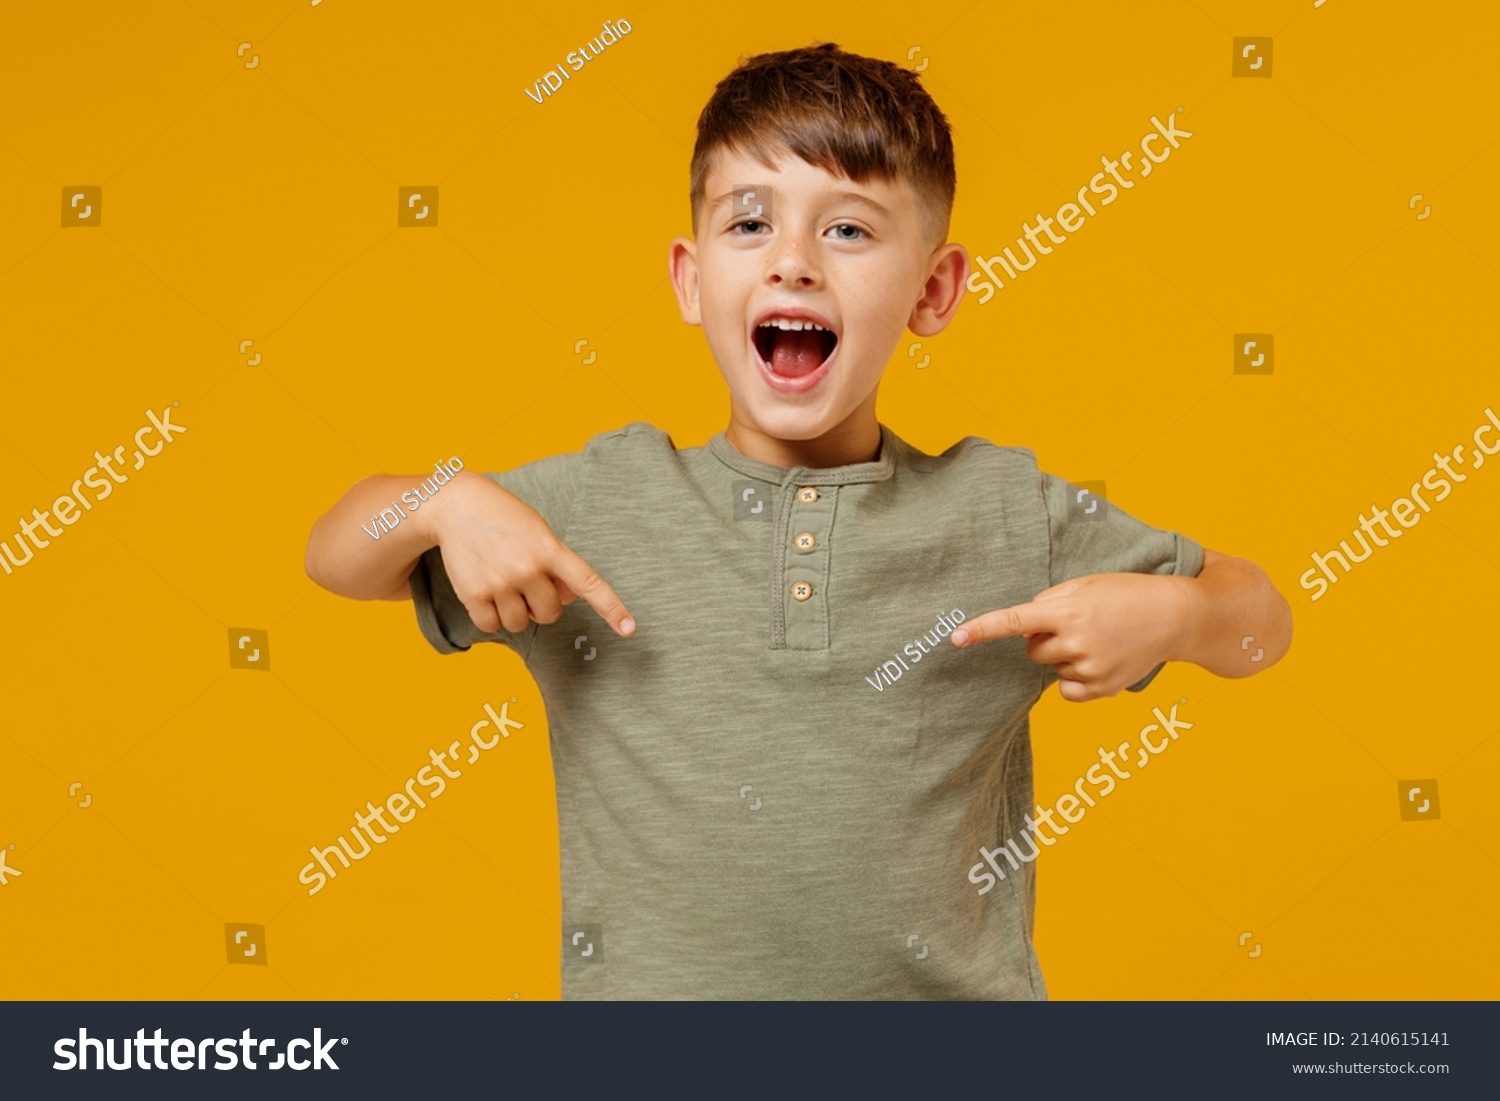 Little small smiling happy boy 6-7 years old in green casual t-shirt point in index finger on himself isolated on plain yellow background studio portrait. Mother's Day love family lifestyle concept #2140615141